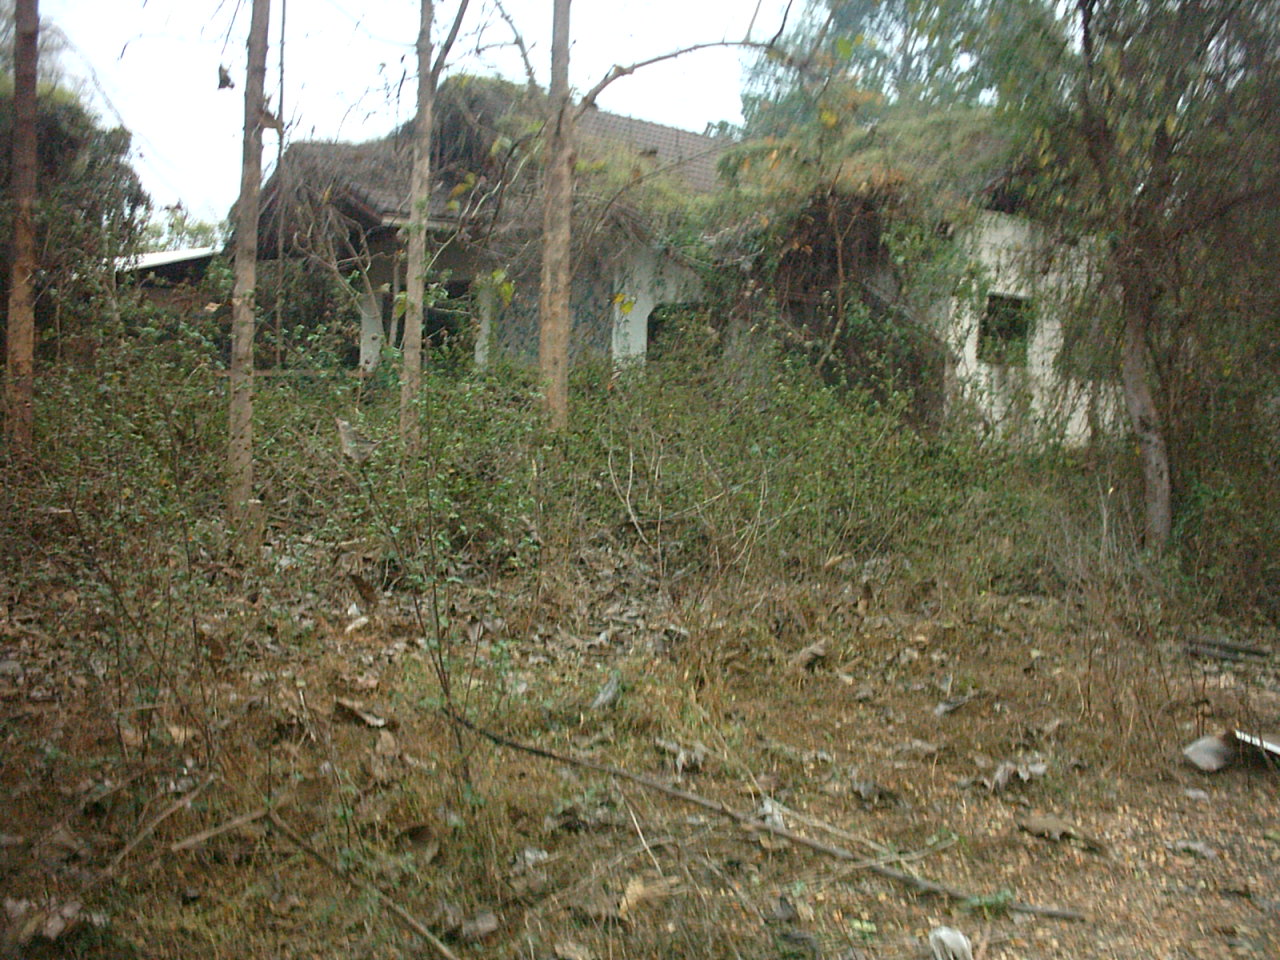 Exploring an abandoned mansion in Chiang Mai-05020224-jpg